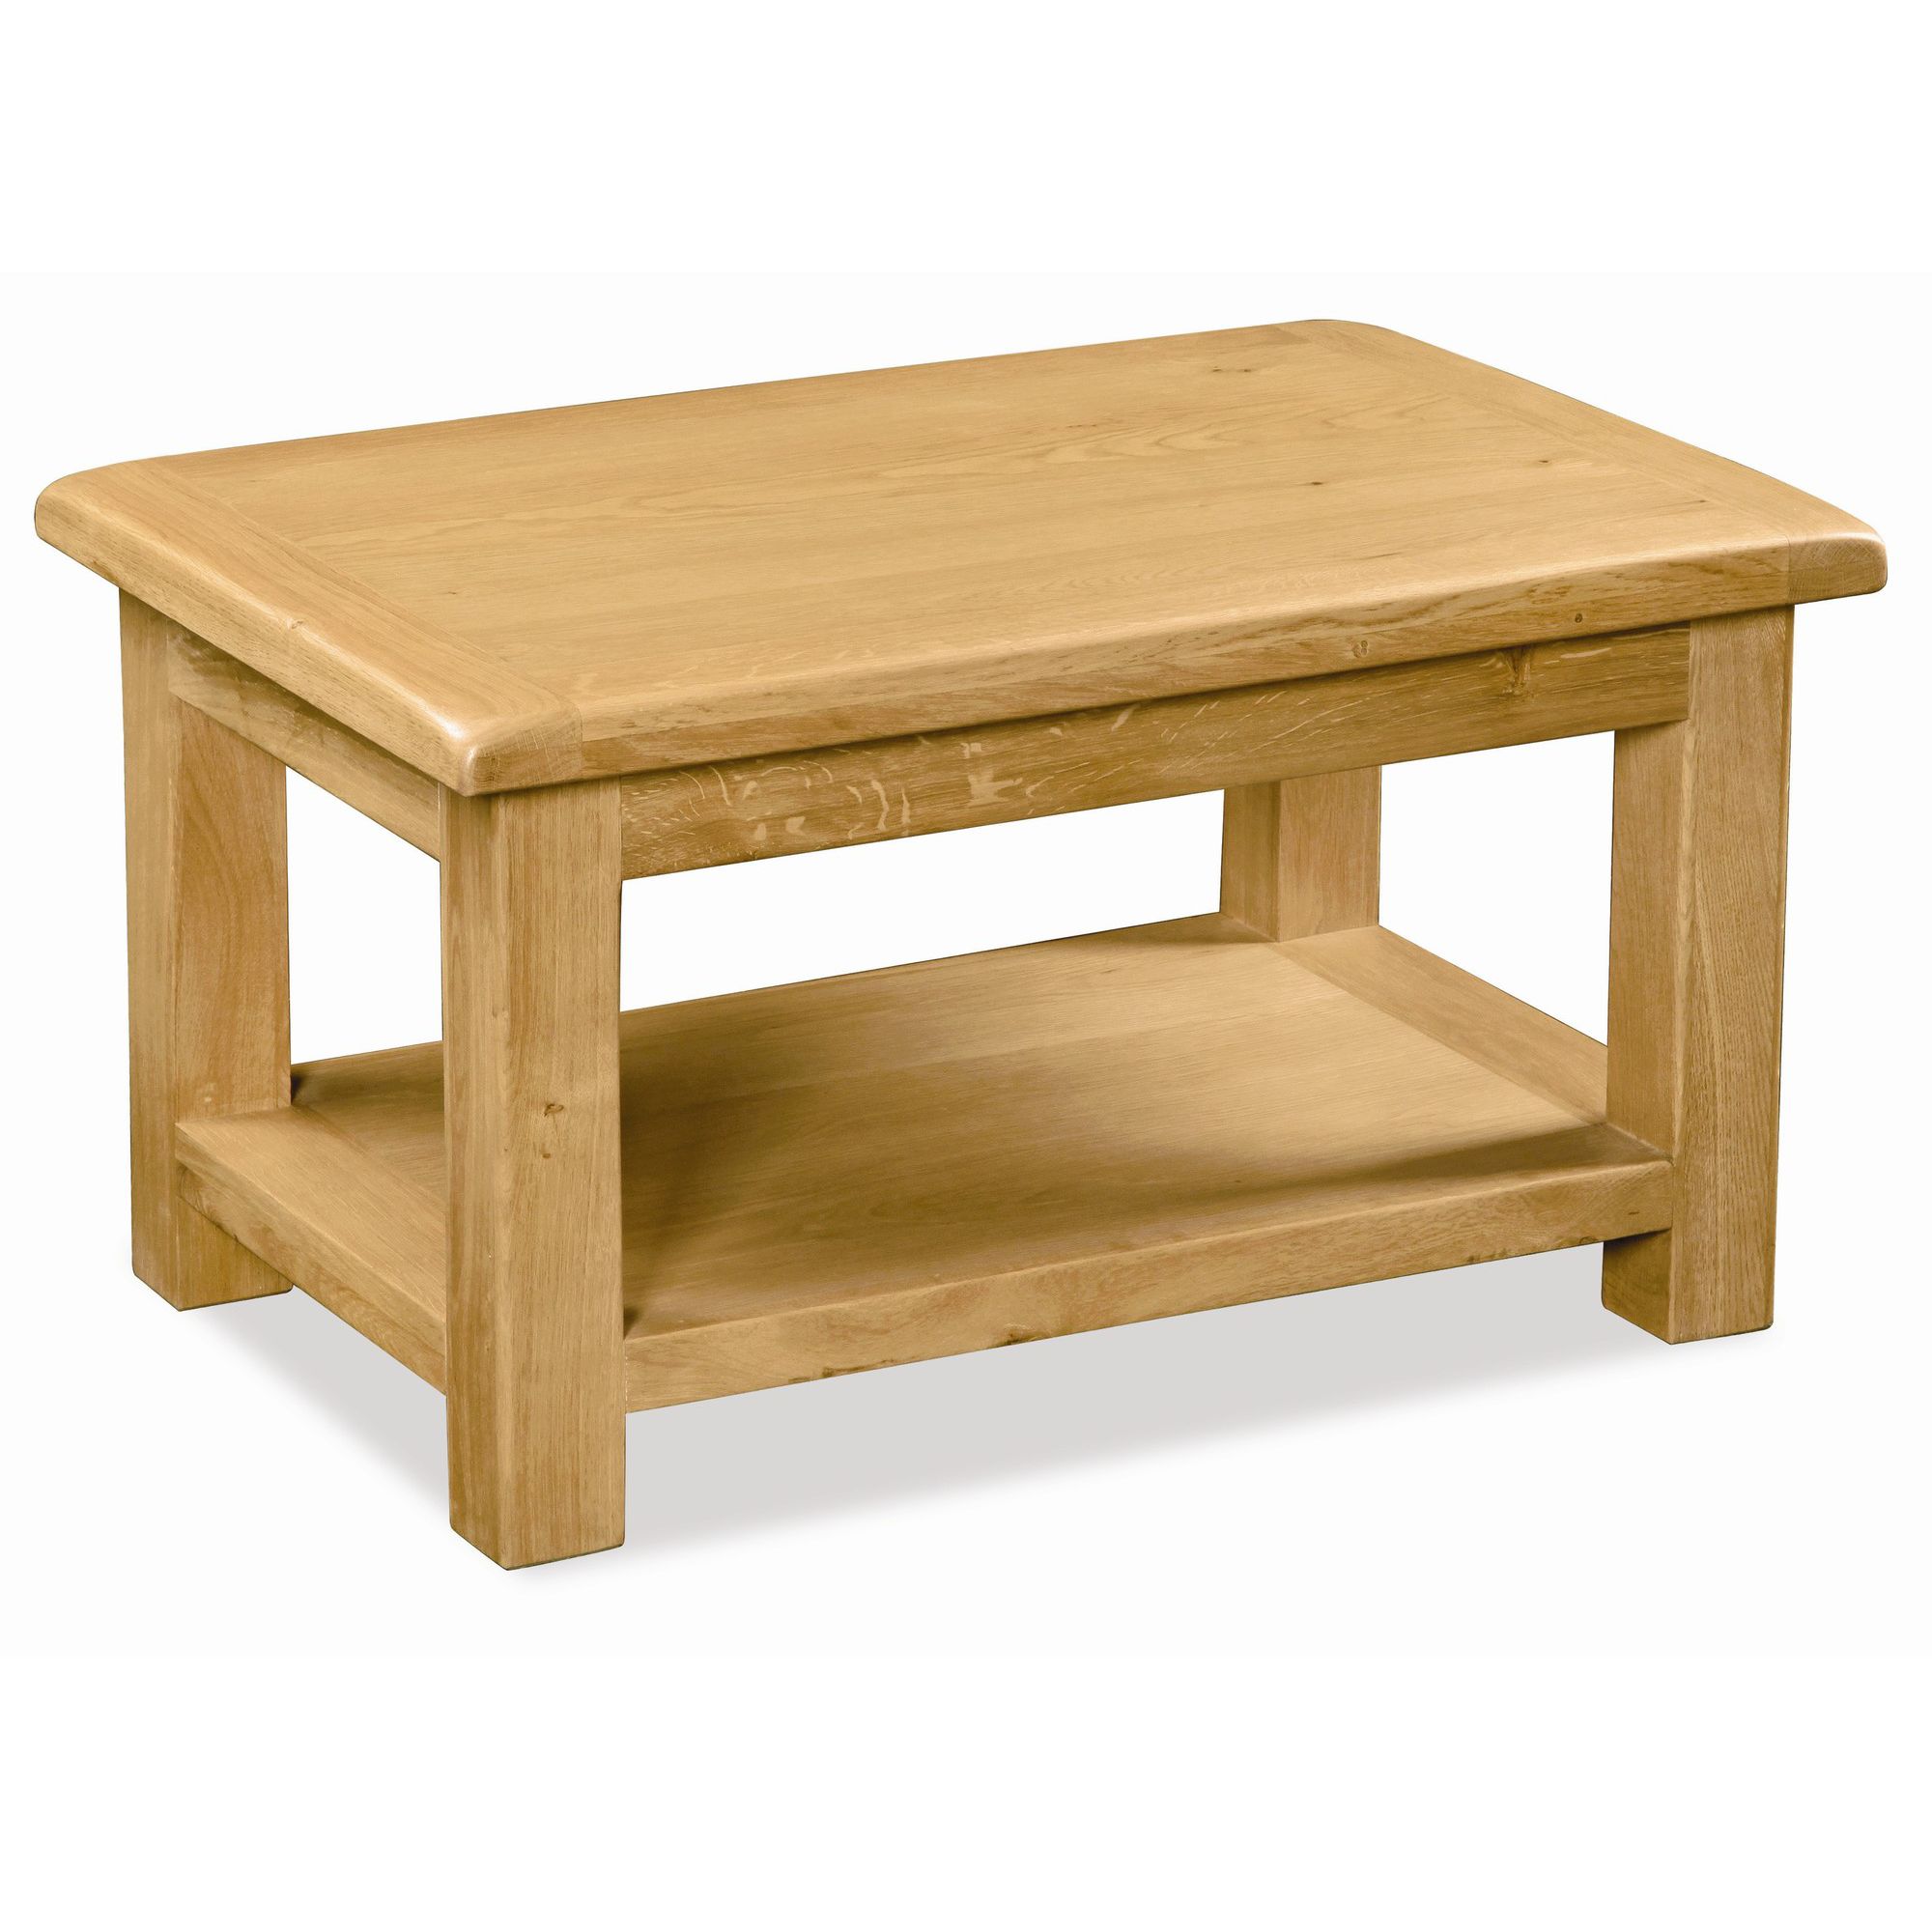 Alterton Furniture Pemberley Coffee Table - Large at Tesco Direct